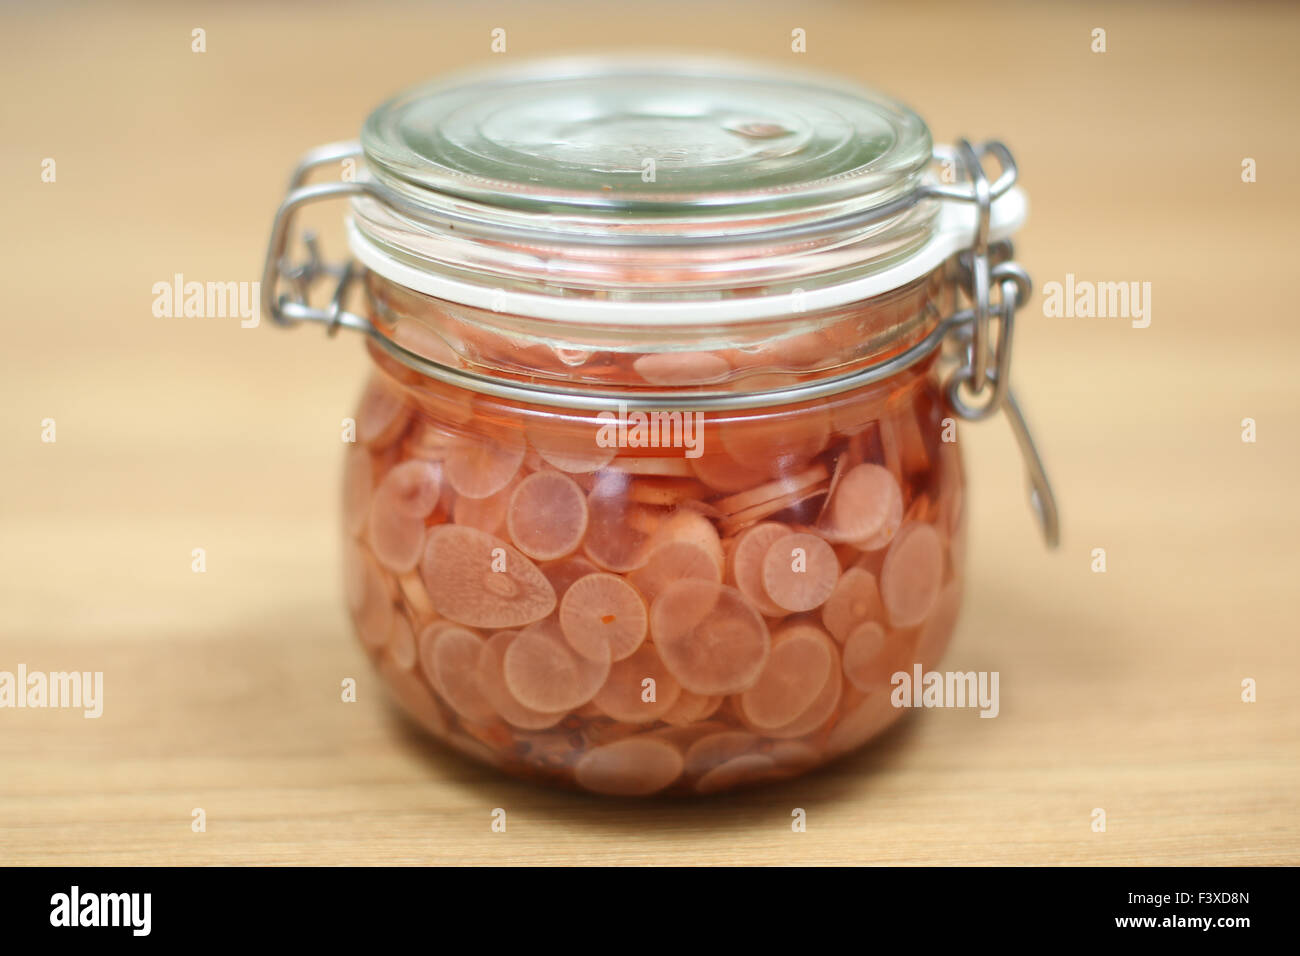 A jar of sliced and pickled radishes. Stock Photo